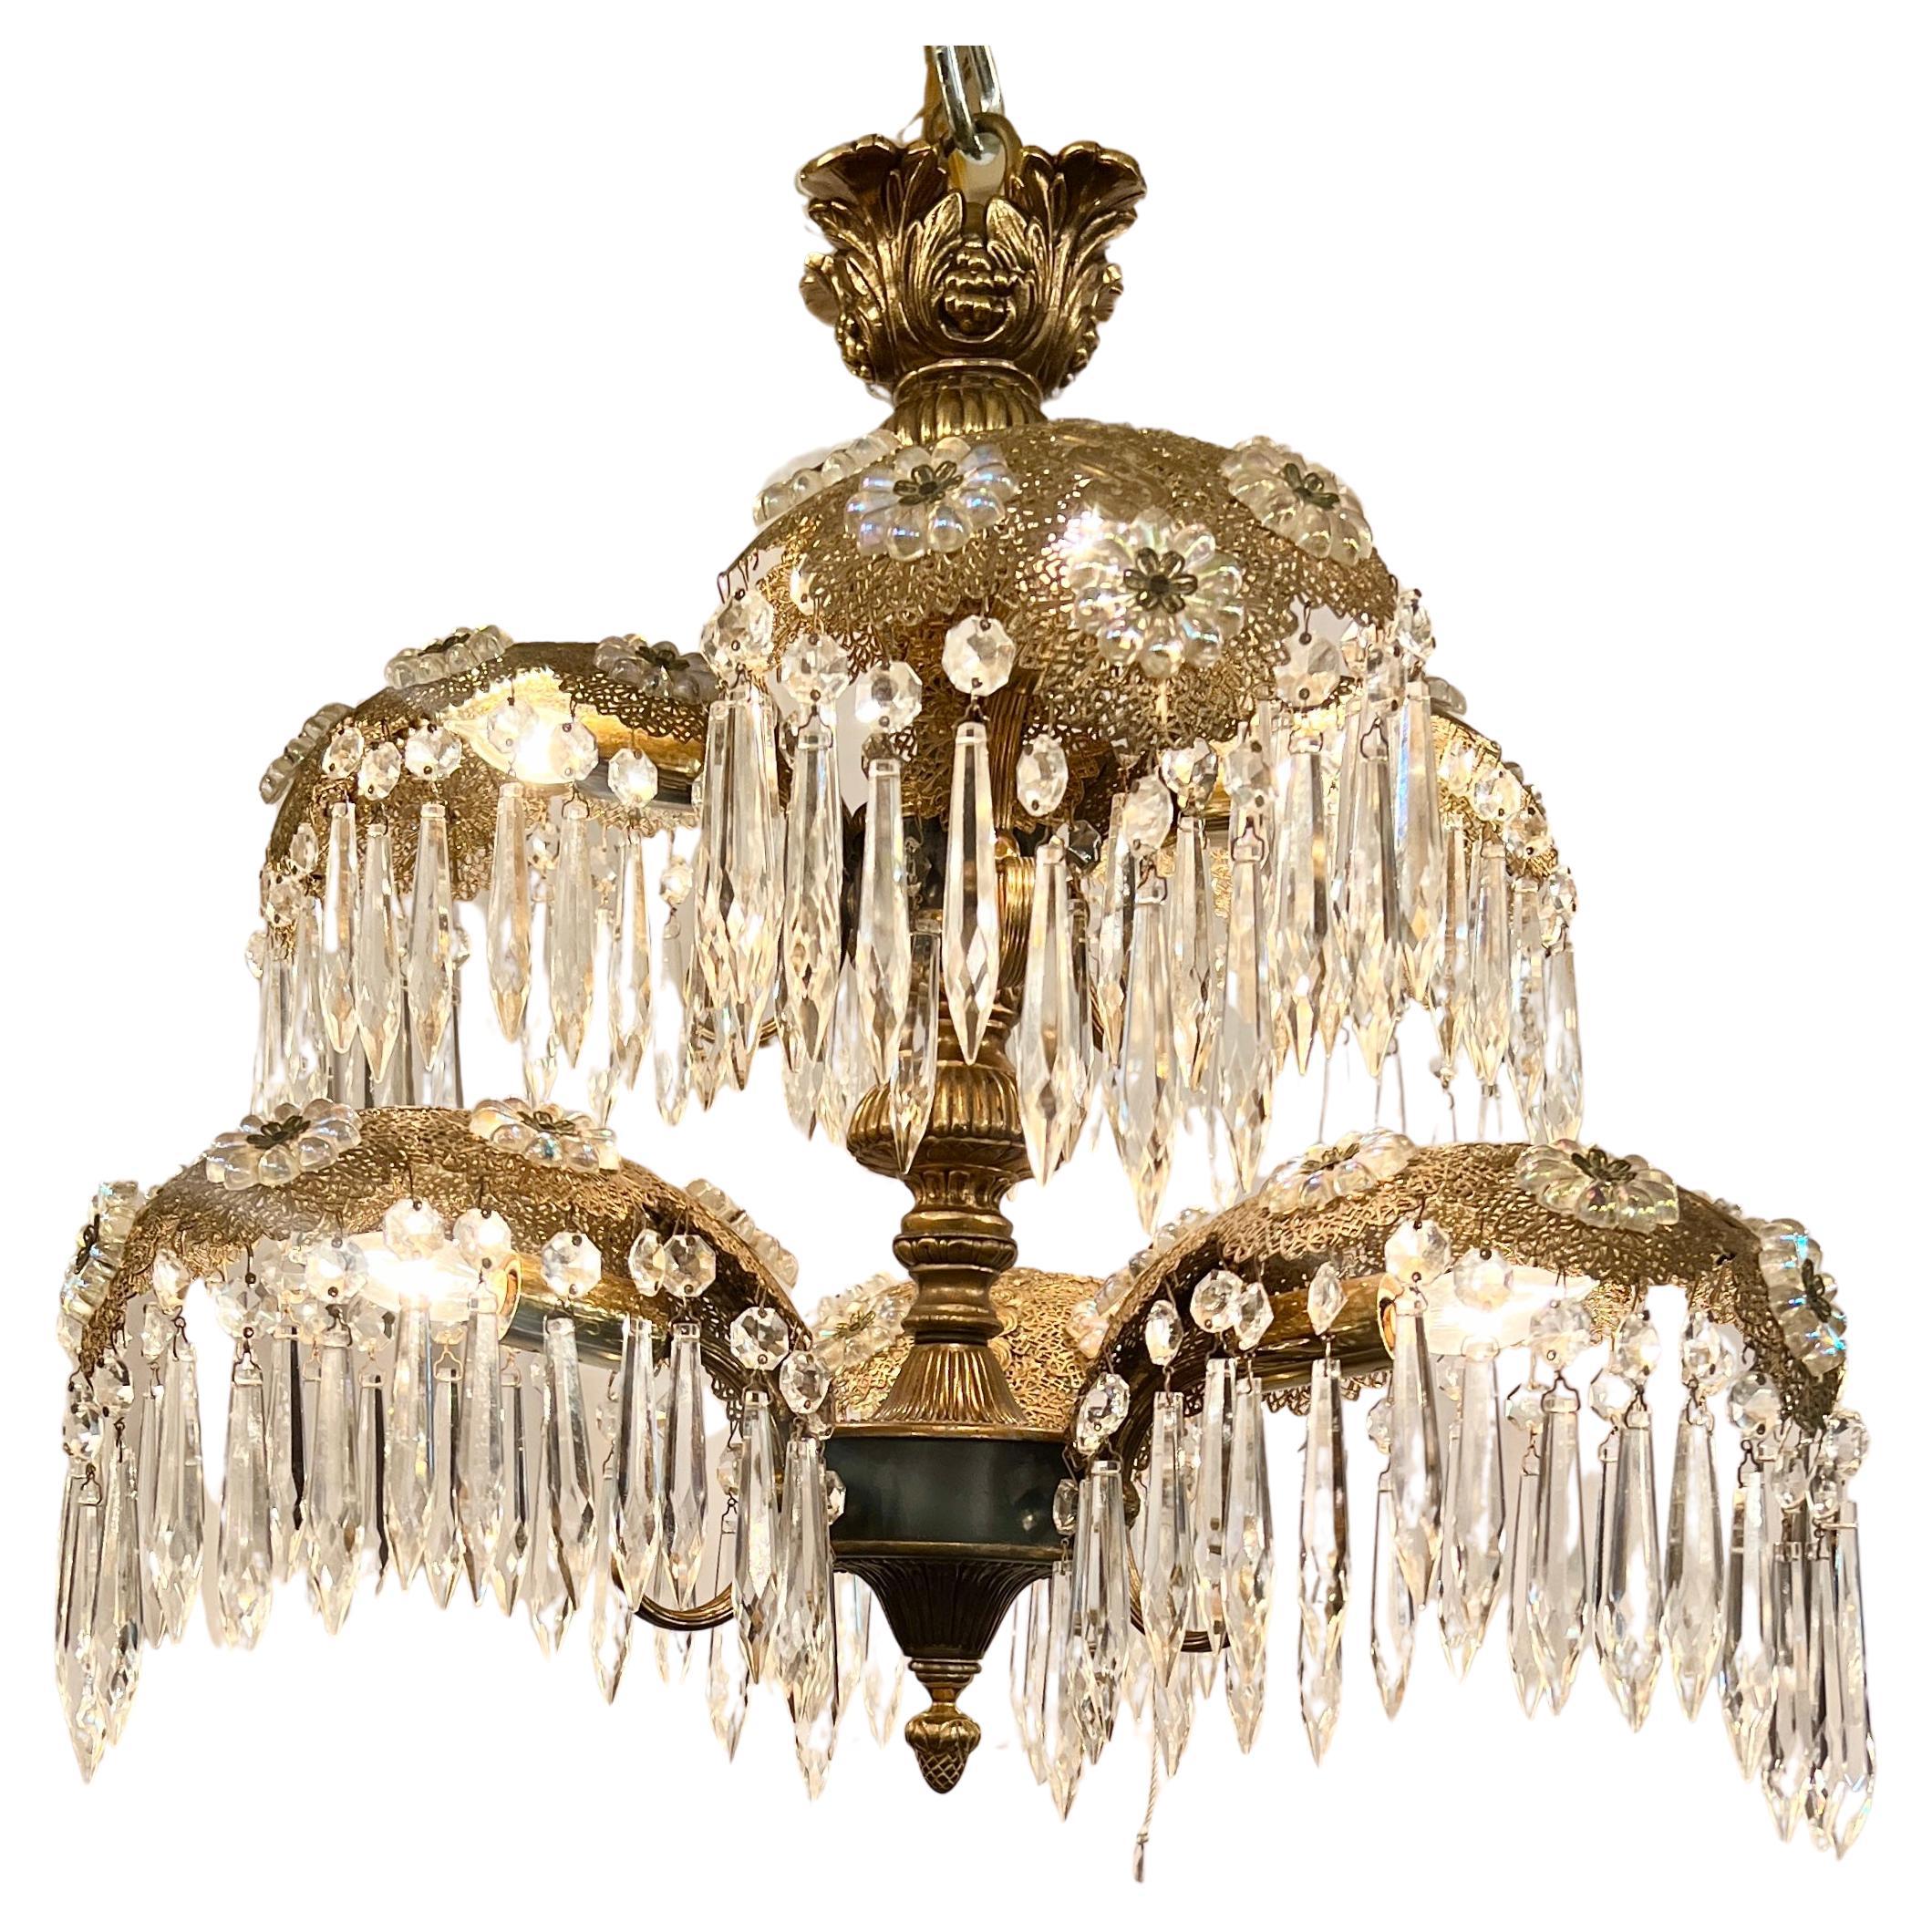 Pair Estate French Gold Bronze and Cut Crystal Palm Chandeliers, Circa 1940-1950.